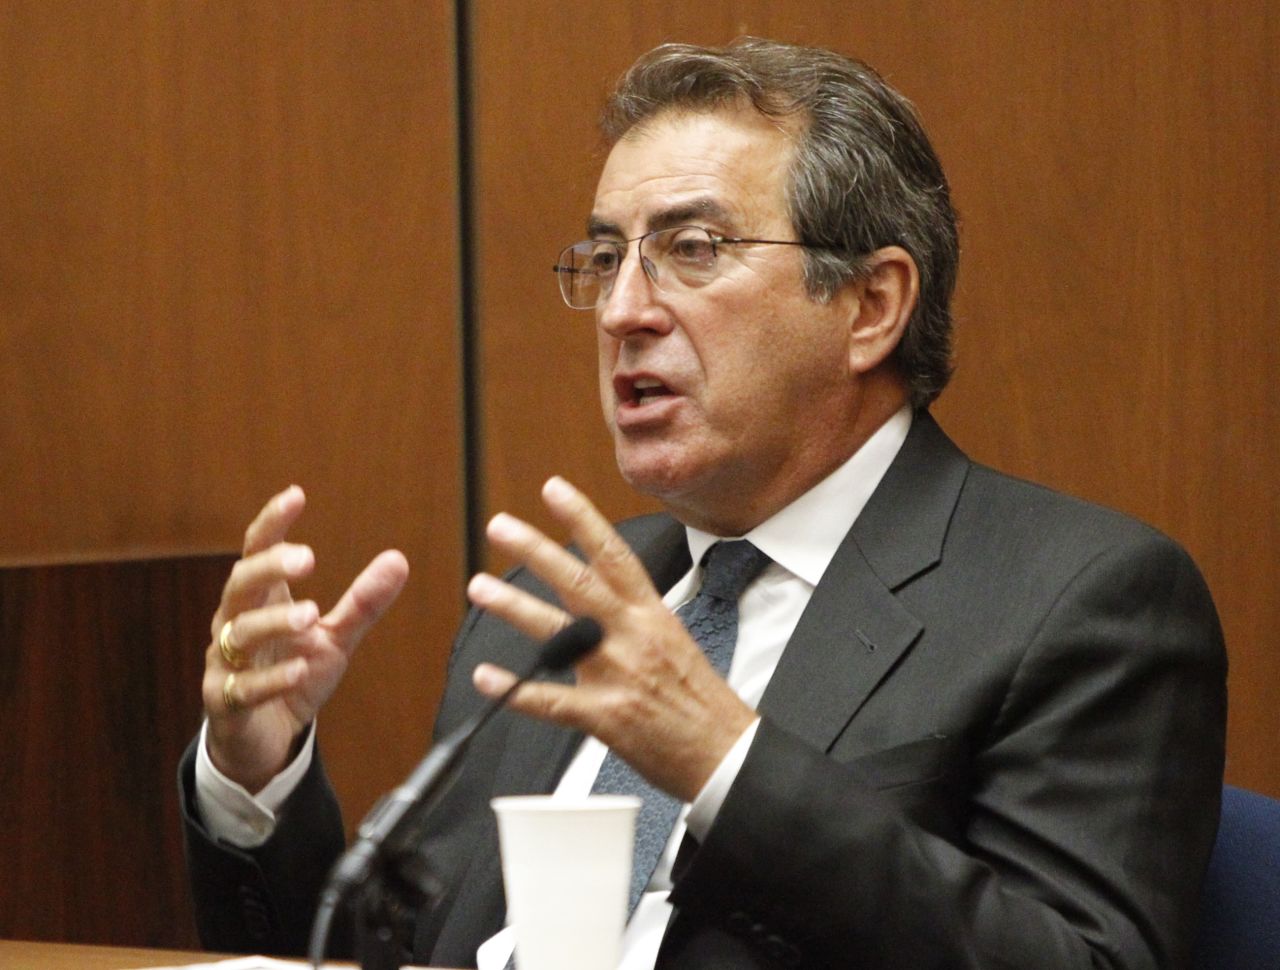 <strong>Kenny Ortega:</strong> He was chosen by Michael Jackson and AEG Live to direct and choreograph the "This Is It" shows.  Ortega, who choreographed for Jackson's "Dangerous" and "HIStory" tours, testified at Dr. Conrad Murray's criminal trial that "Jackson was frail" at a rehearsal days before his death.